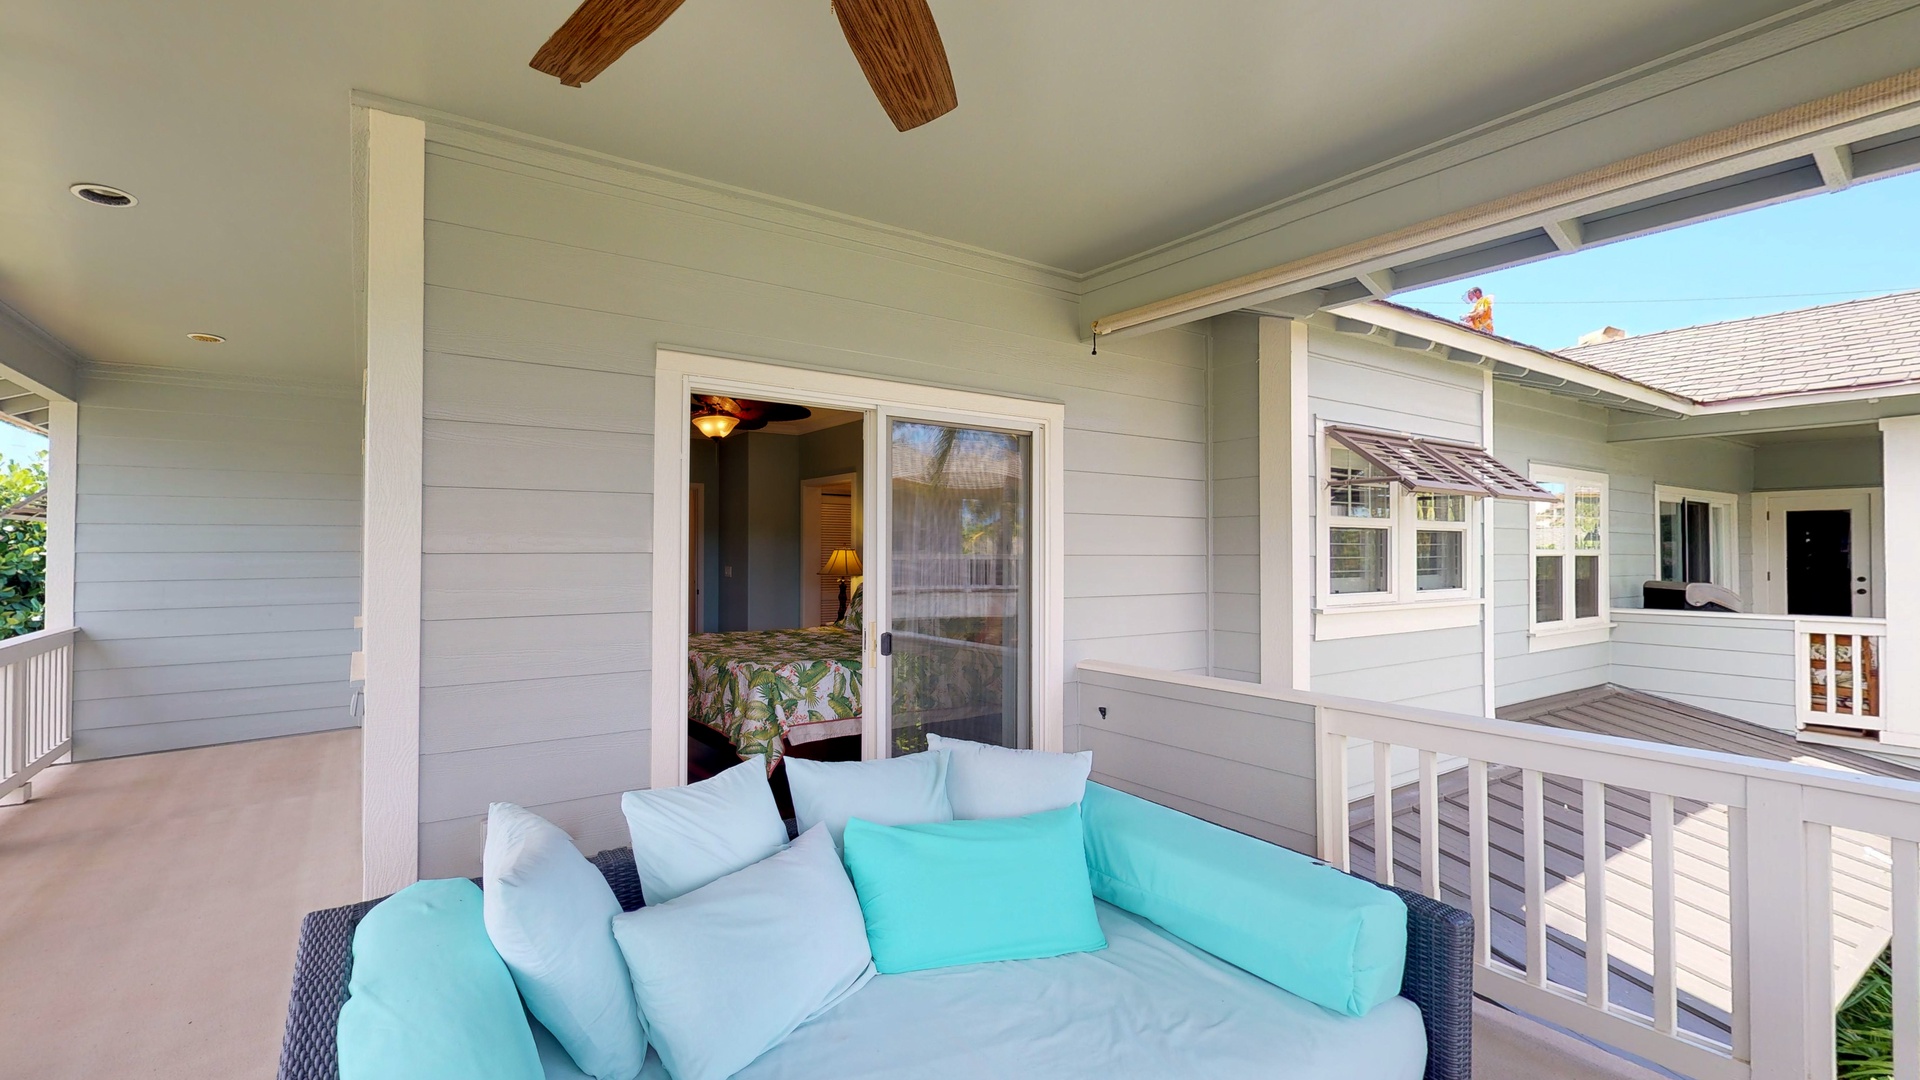 Kapolei Vacation Rentals, Coconut Plantation 1200-4 - The lanai provides comfortable seating and ceiling fan.